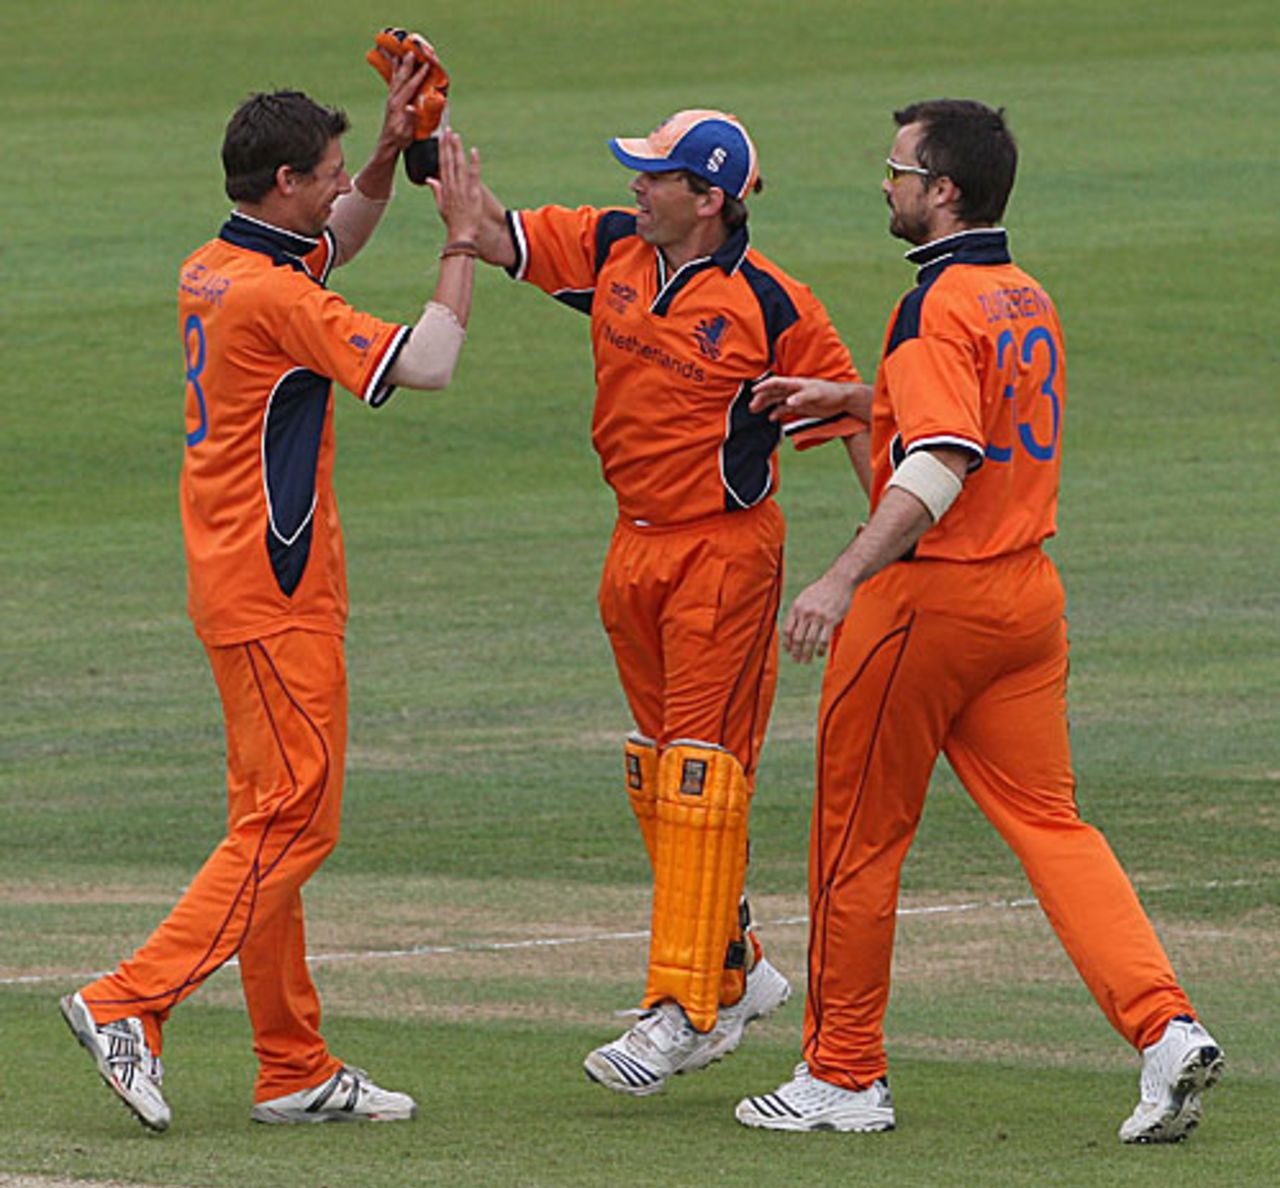 Pieter Seelaar is congratulated by team-mates after picking up a wicket, Netherlands v Scotland, ICC World Twenty20 Warm-up Matches, The Oval, June 3, 2009